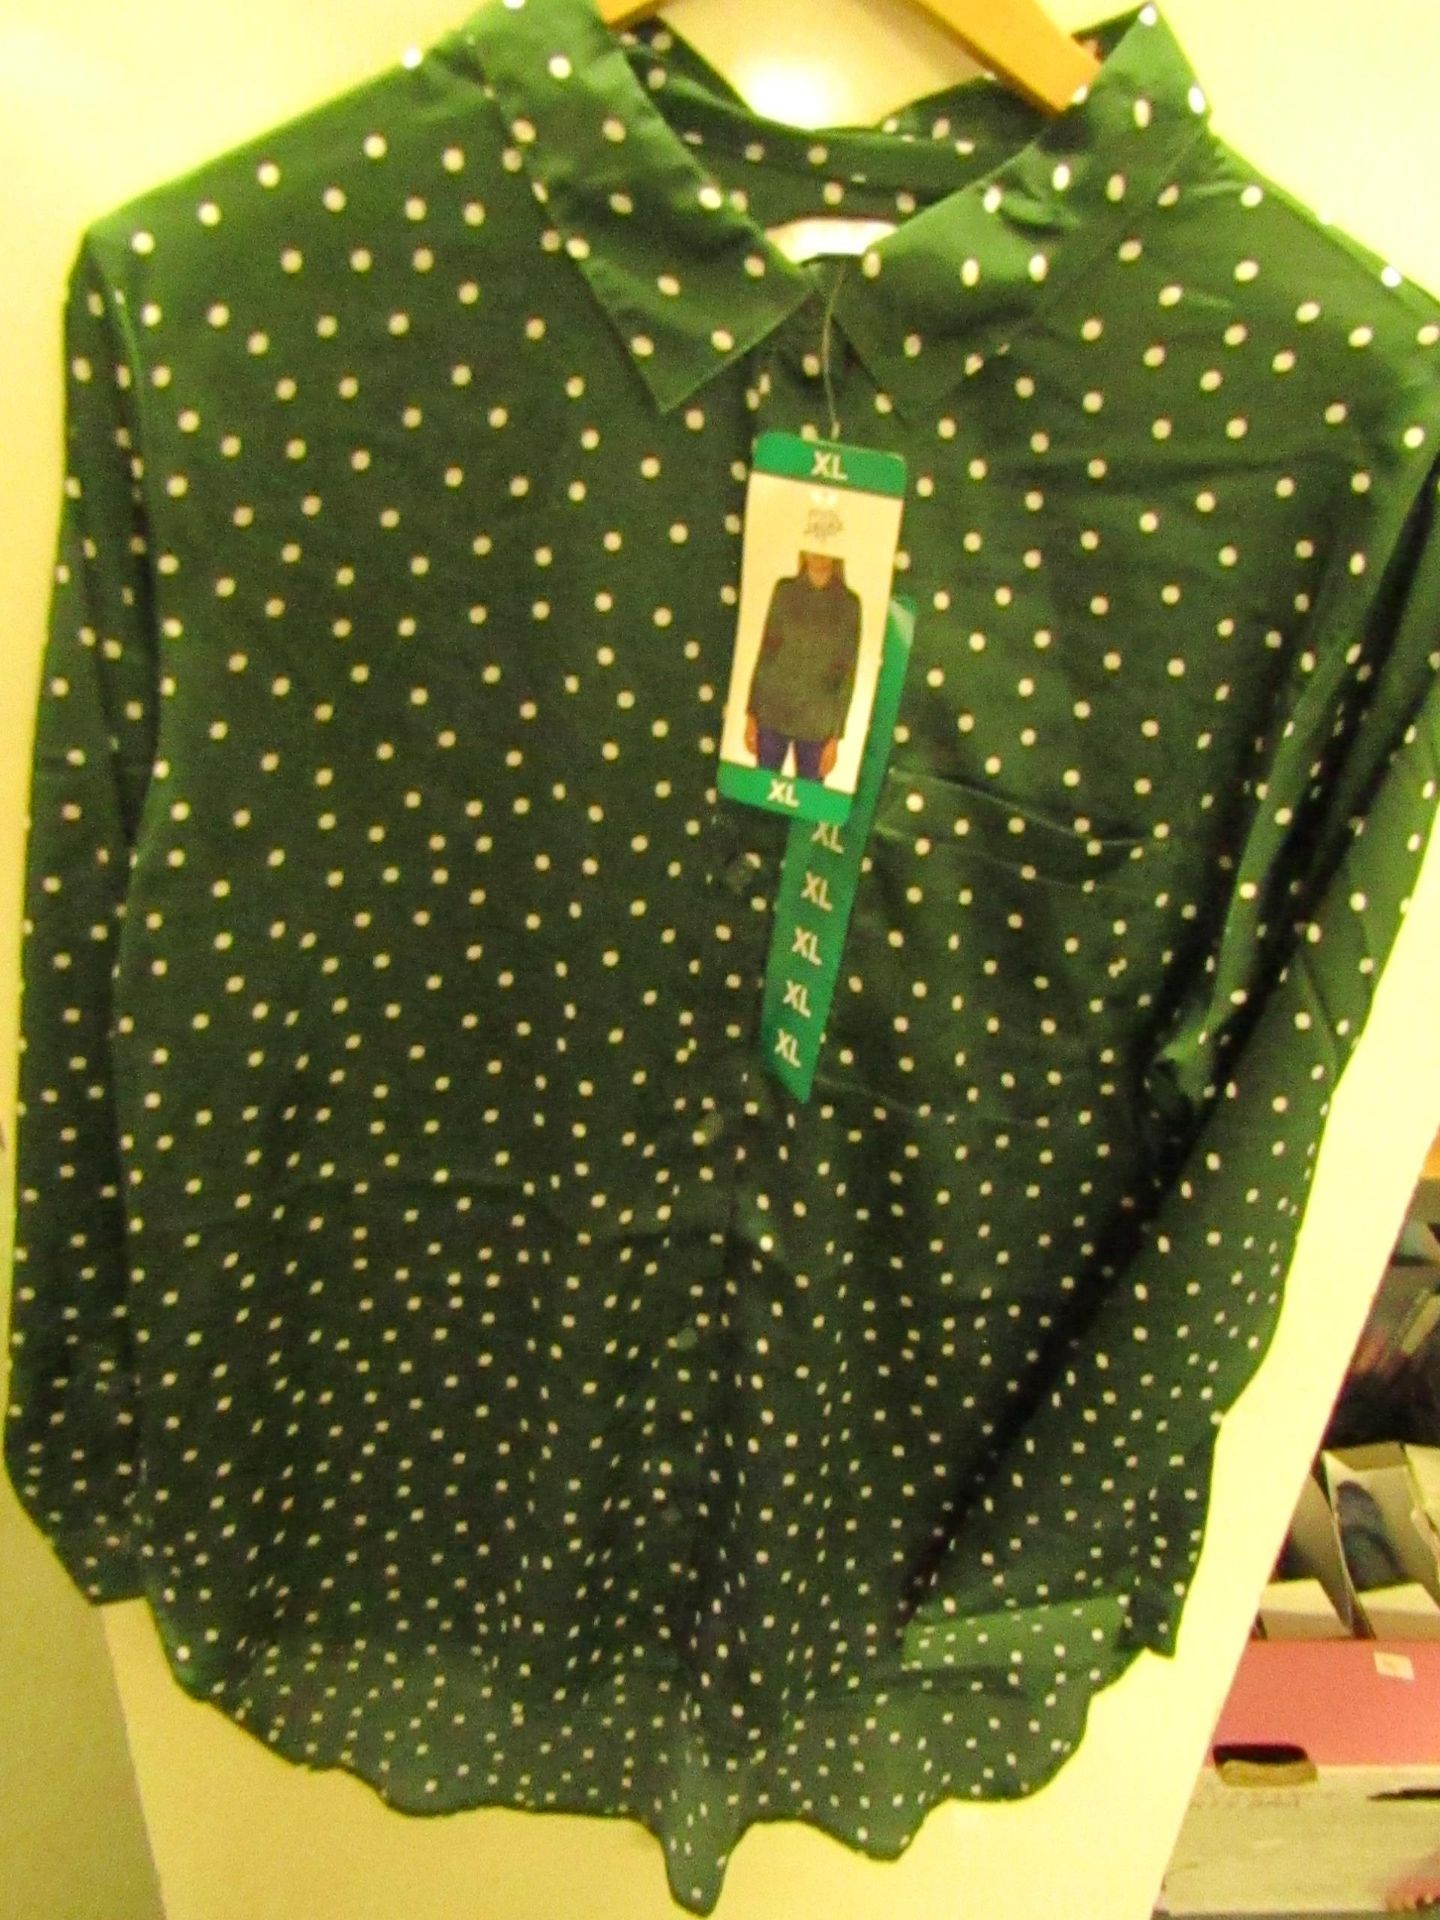 Jachs New York Girlfriends Blouse,Green/White Spots - Size X/L New With Tags